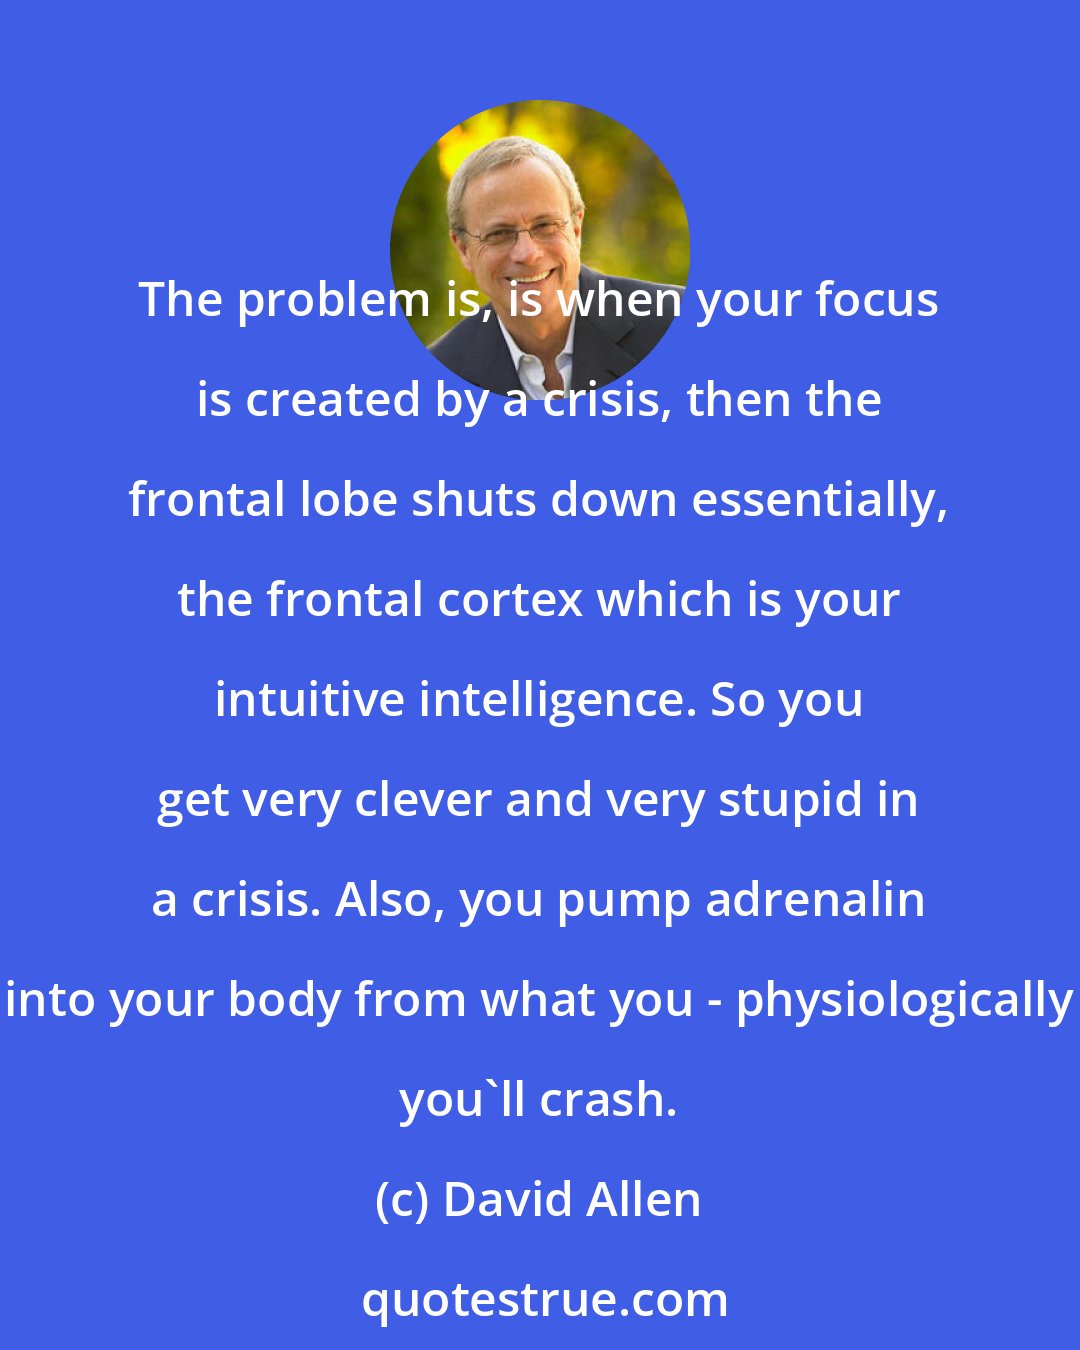 David Allen: The problem is, is when your focus is created by a crisis, then the frontal lobe shuts down essentially, the frontal cortex which is your intuitive intelligence. So you get very clever and very stupid in a crisis. Also, you pump adrenalin into your body from what you - physiologically you'll crash.